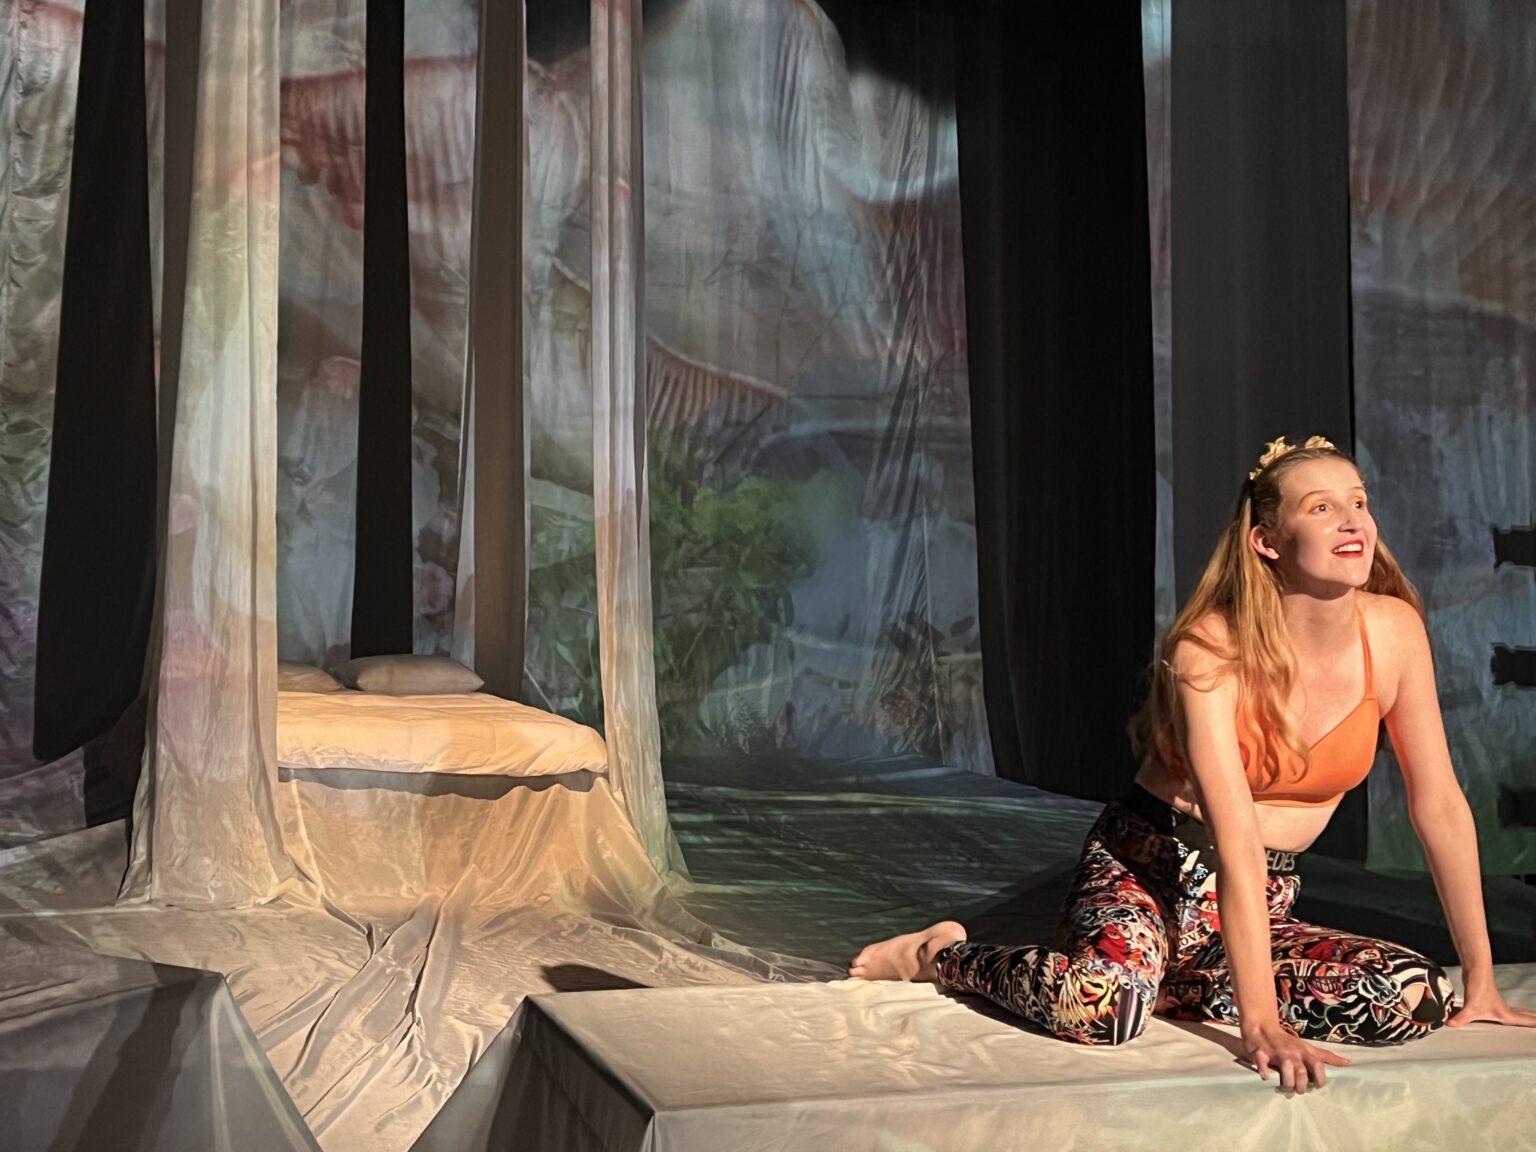 Western Washington University's version of Shakespeare's “Romeo and Juliet” shows Oct. 14–16 at the Performing Arts Center's Mainstage theater. Director Mark Kuntz says no swords will be involved in this rendition of the Bard's masterwork.